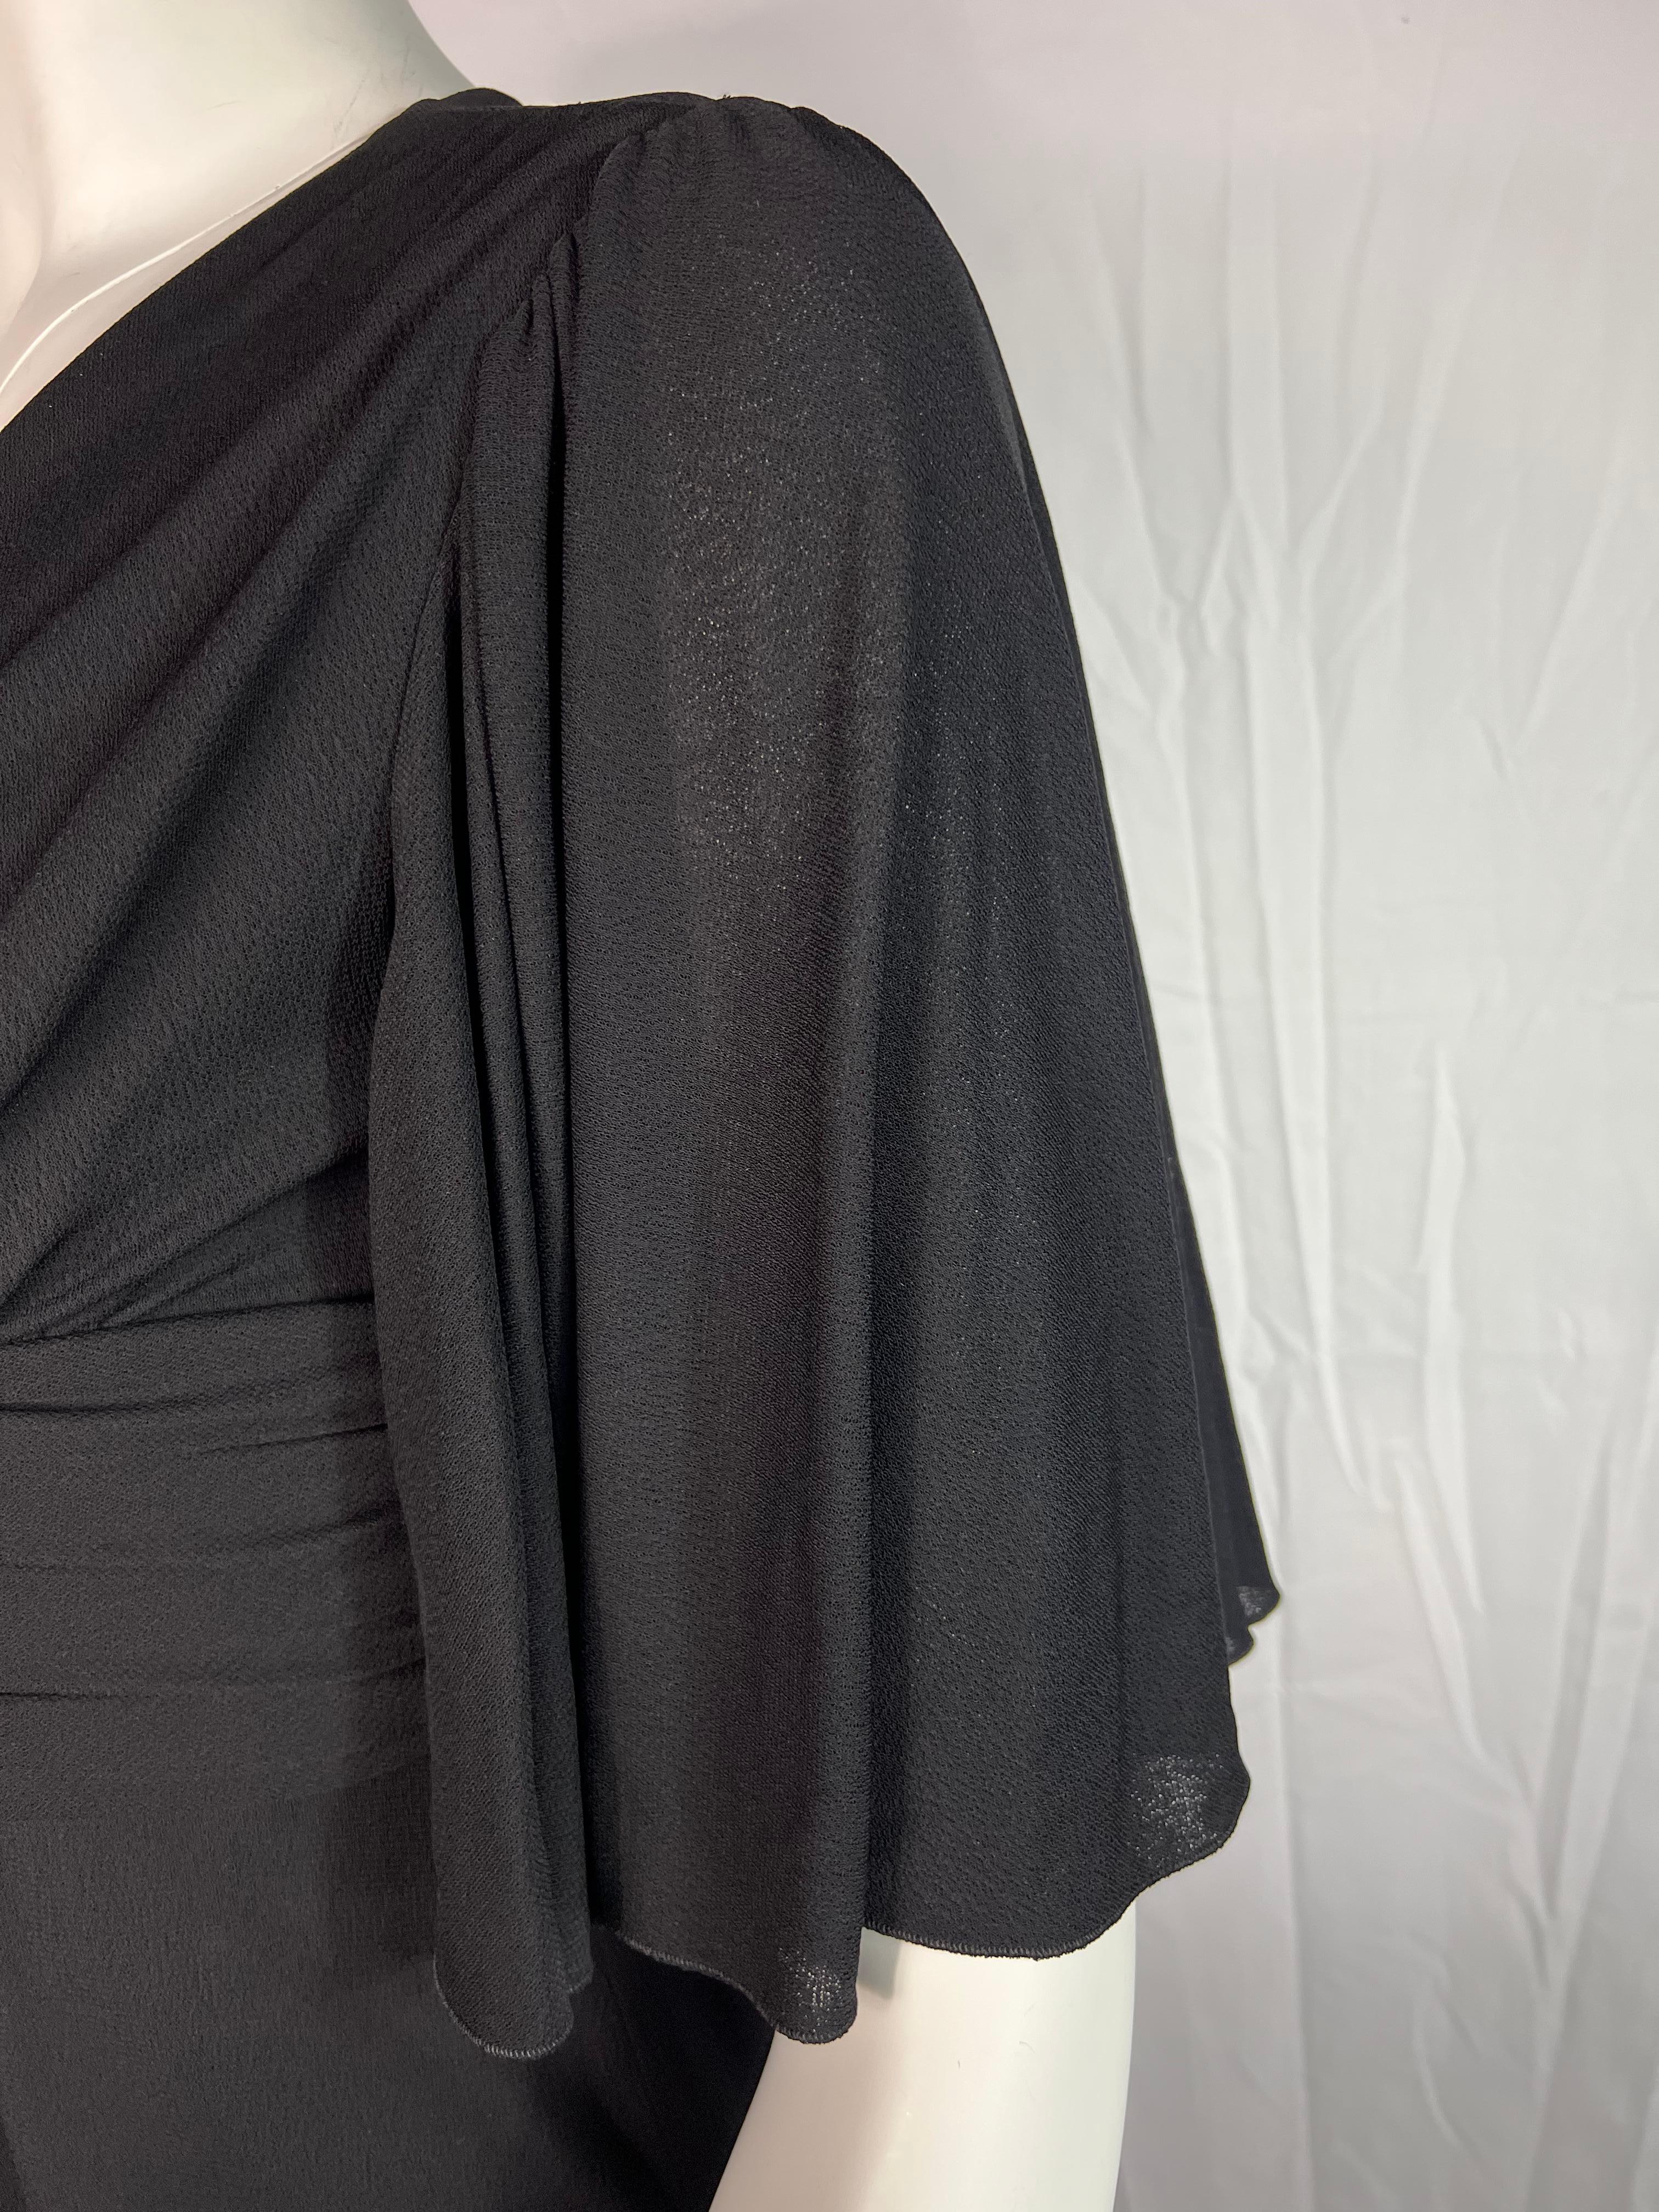 Gucci Black Rayon and Silk Maxi Dress Gown w/ Crystal Bow, Size Small For Sale 2